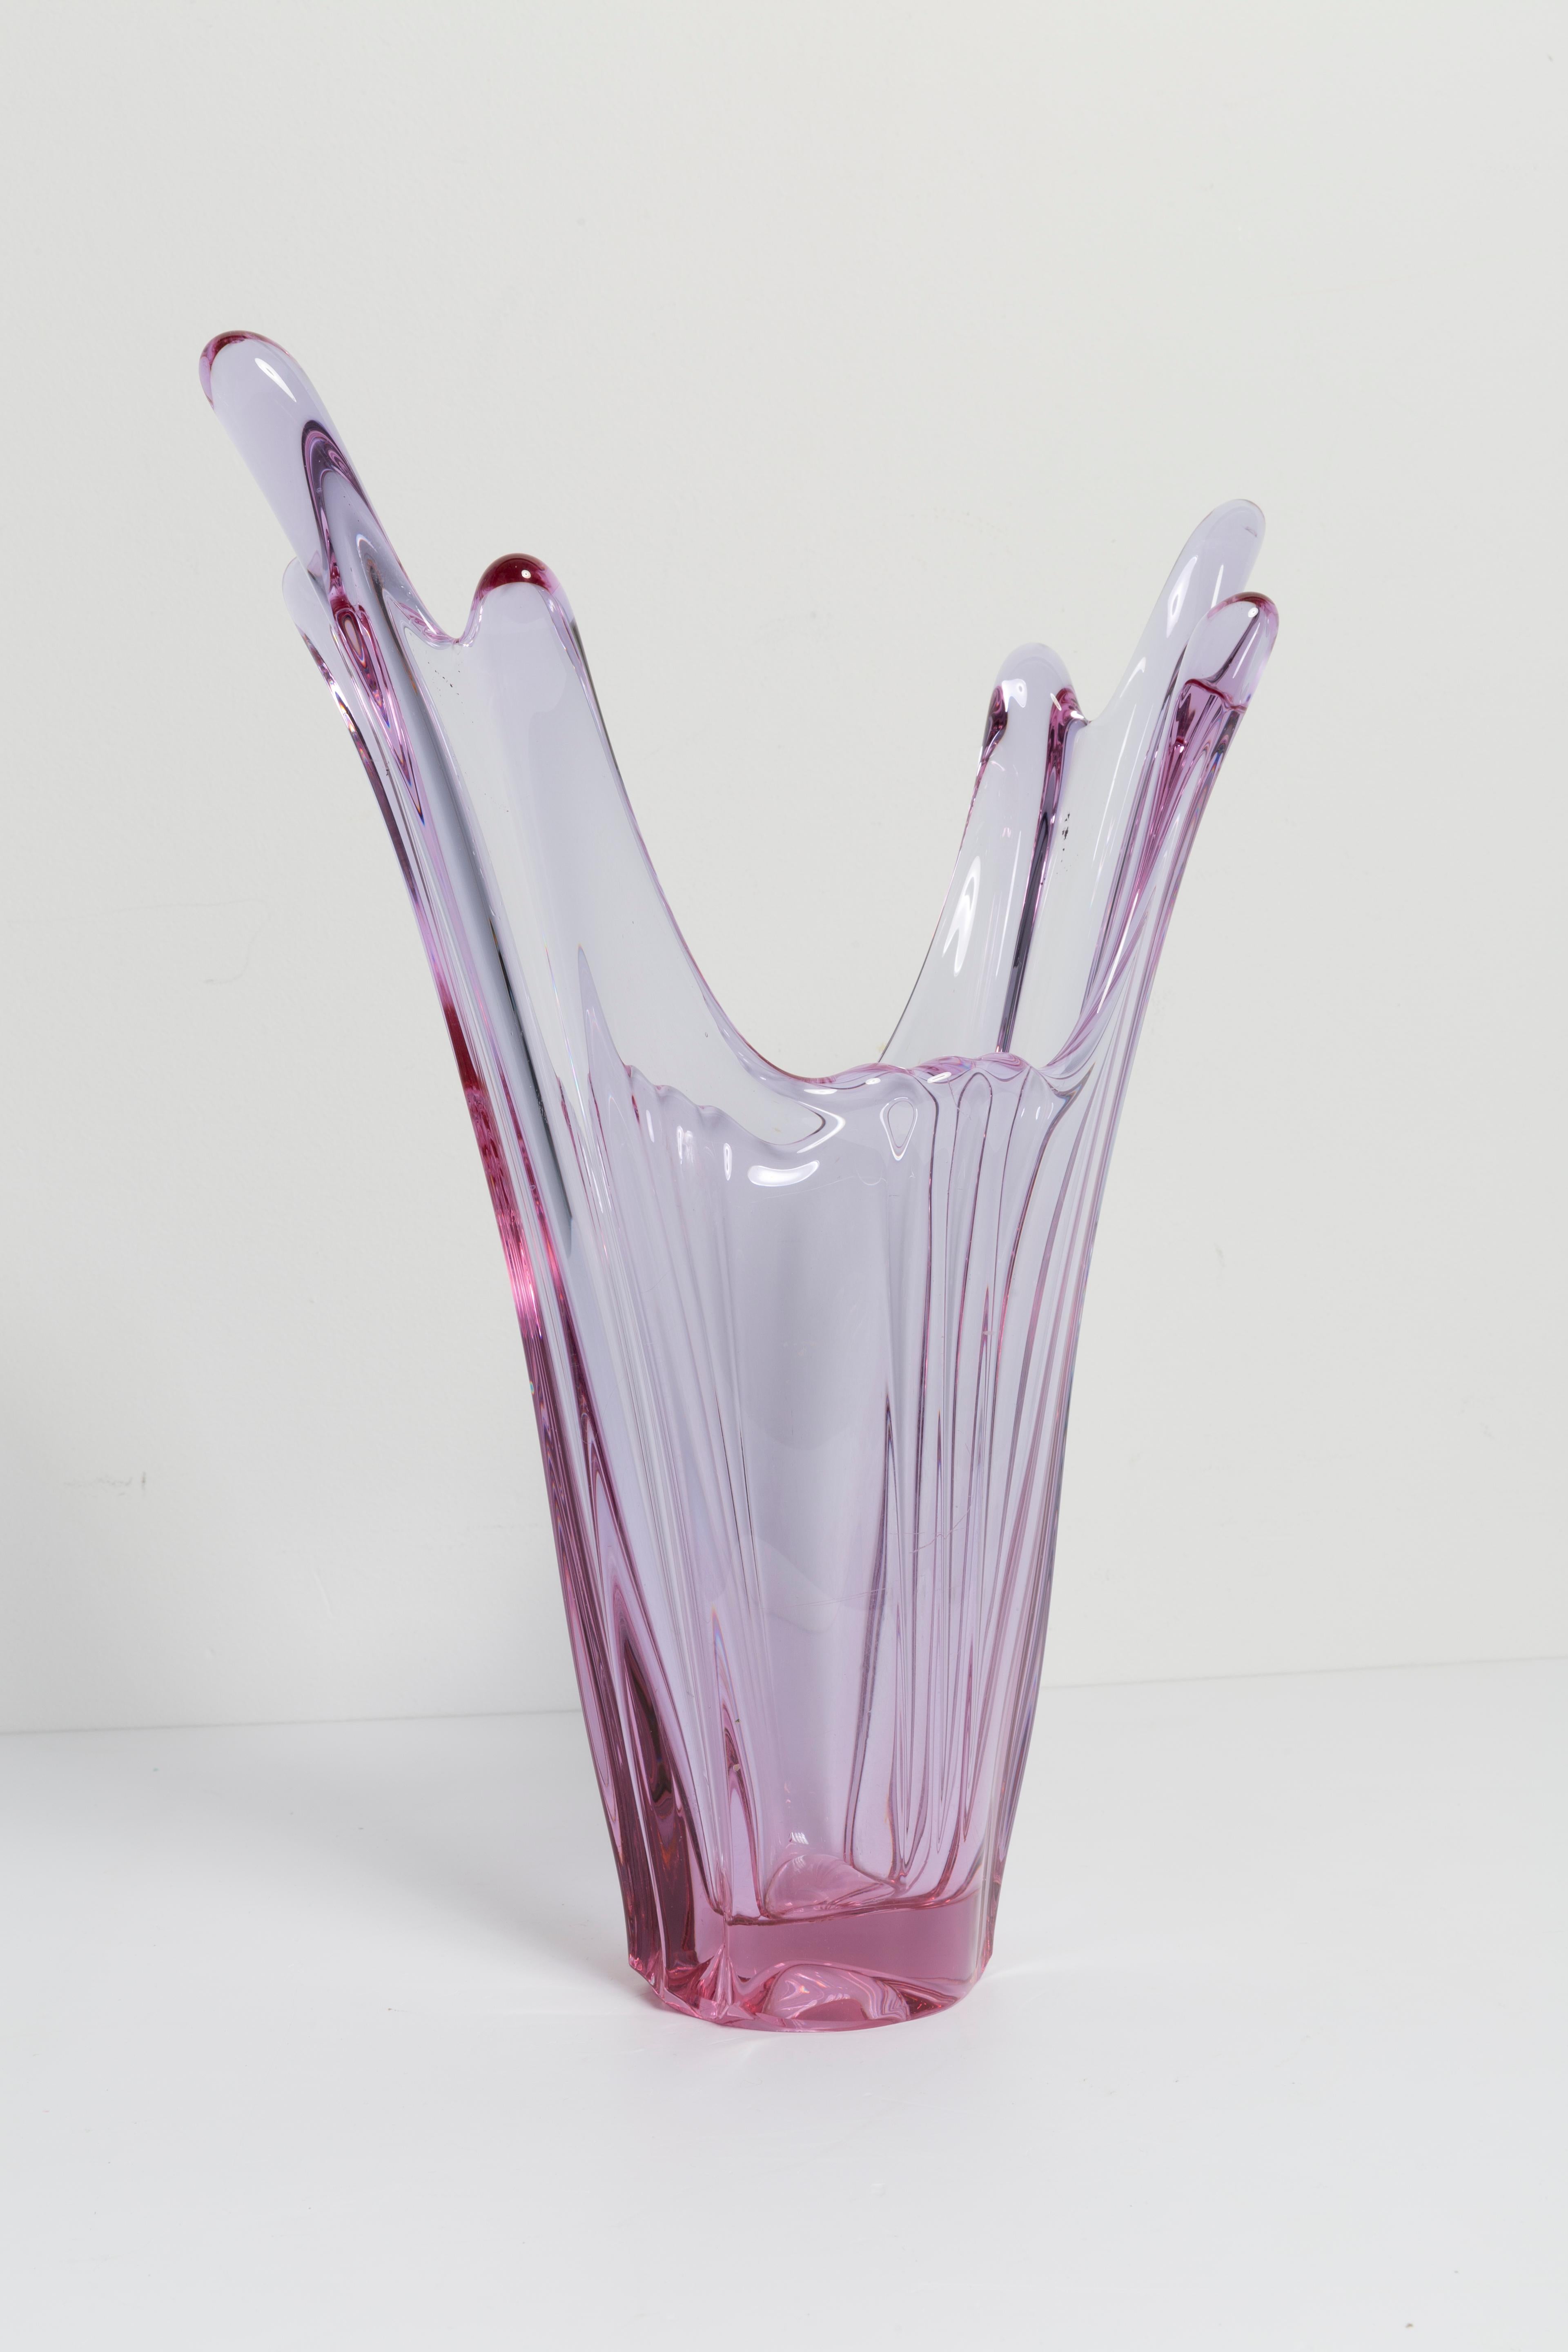 Pink vase in amazing shape. Produced in 1960s in Poland.
Glass in perfect condition. The vase looks like it has just been taken out of the box.

No jags, defects etc. The outer relief surface, the inner smooth. Thick glass vase, massive.

Only